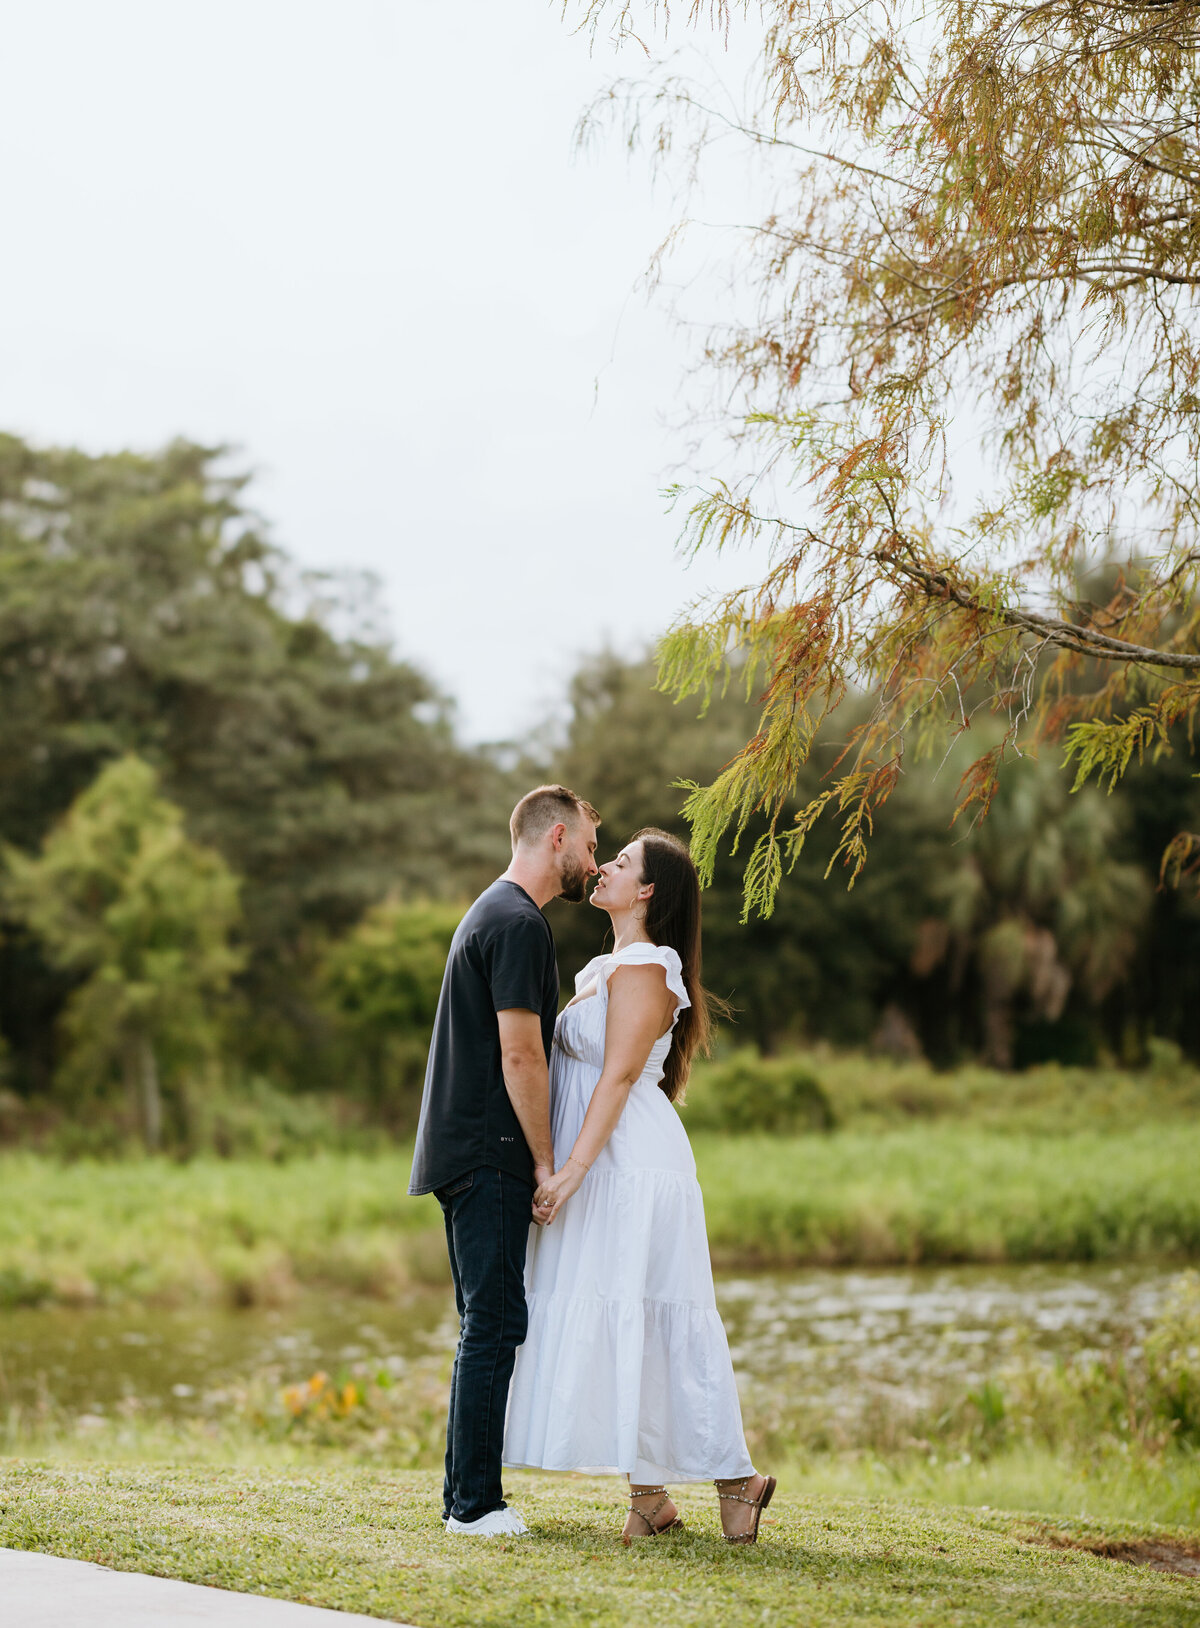 Abbey and Bryor_Engaged_Spanish River Library_Diana Cecilia Photography-8